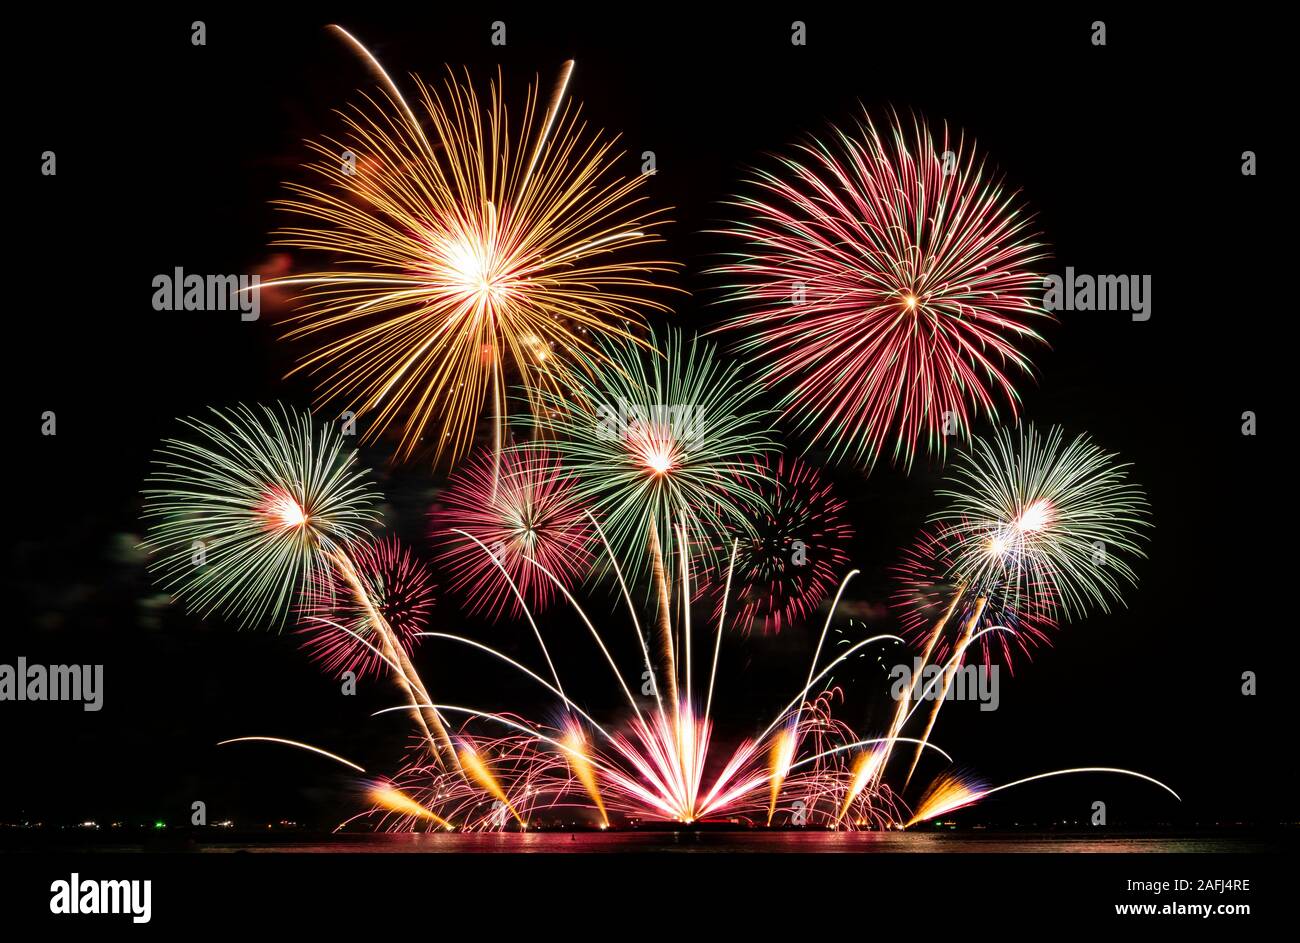 real fireworks festival in the sky for celebration at night over the sea at coast side for new year countdown celebration background Stock Photo